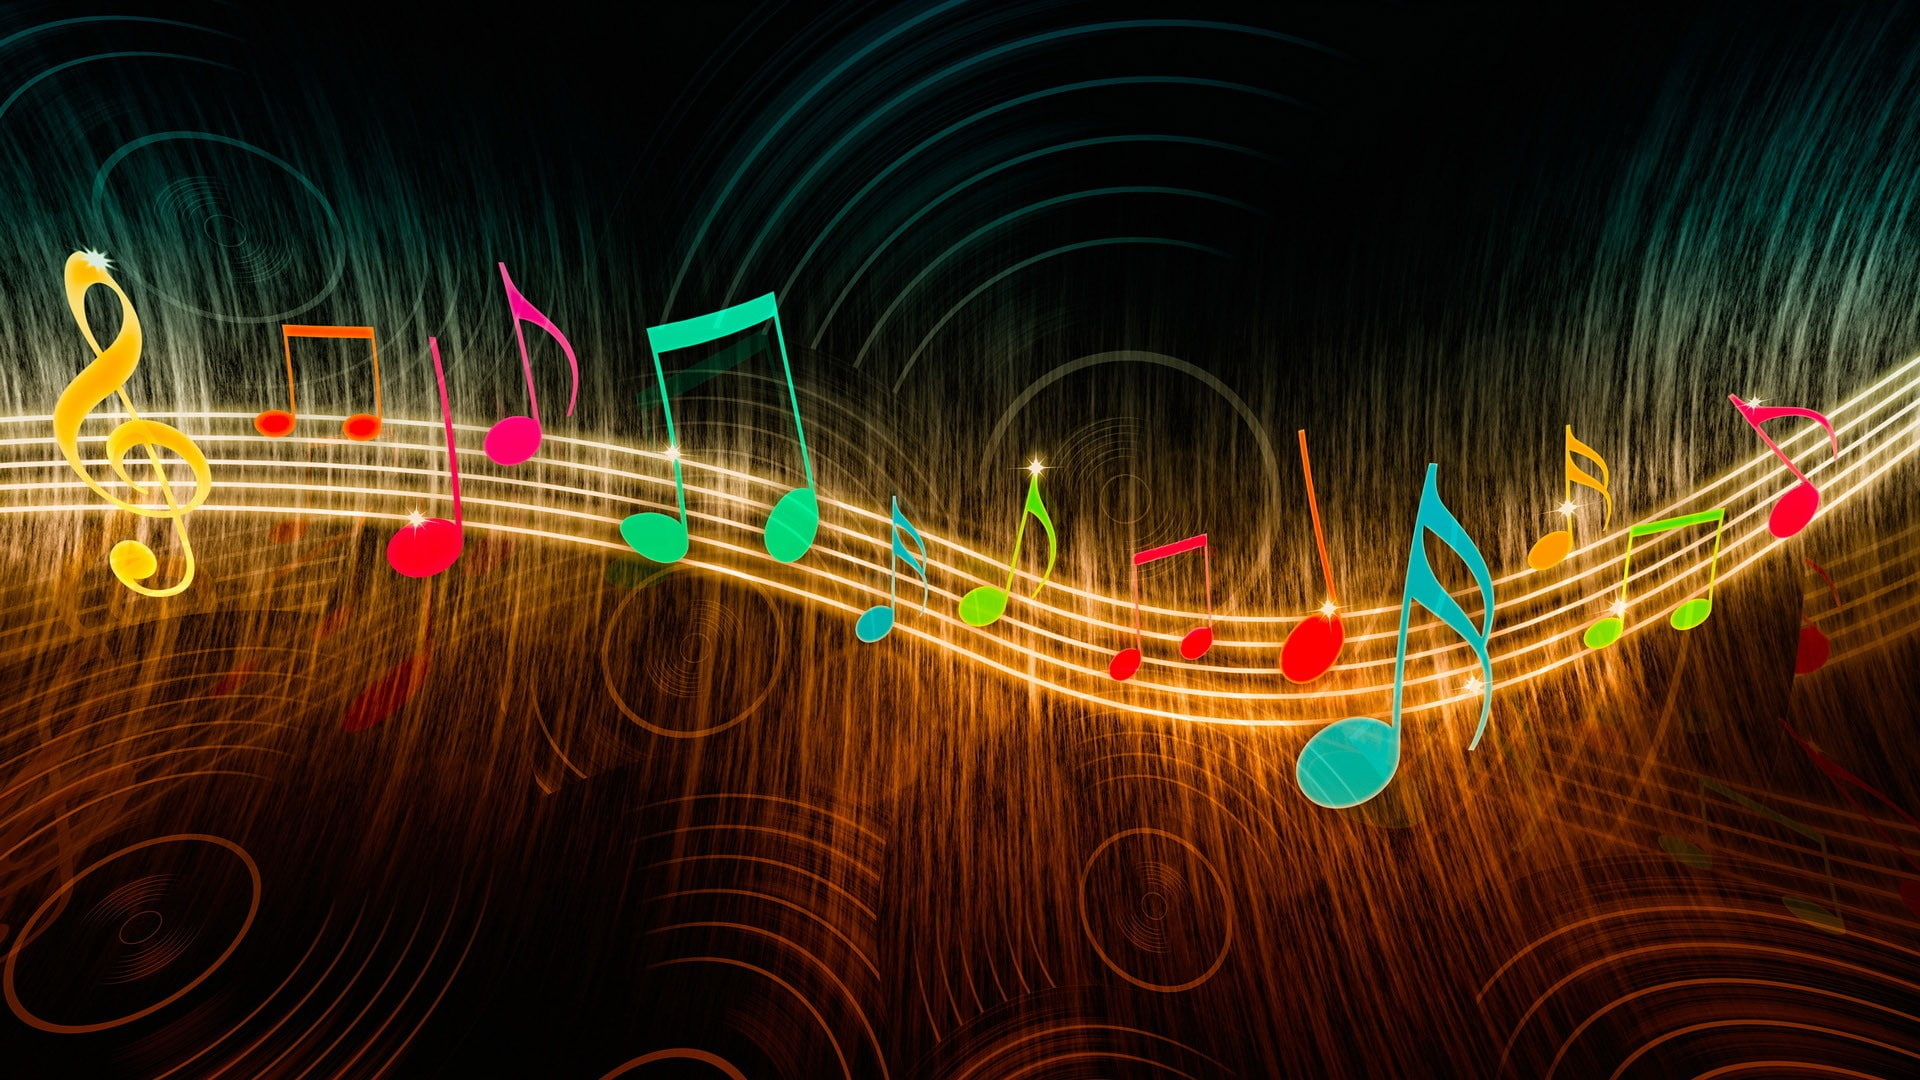 digital art music musical notes wavy lines circles colorful glowing treble clef